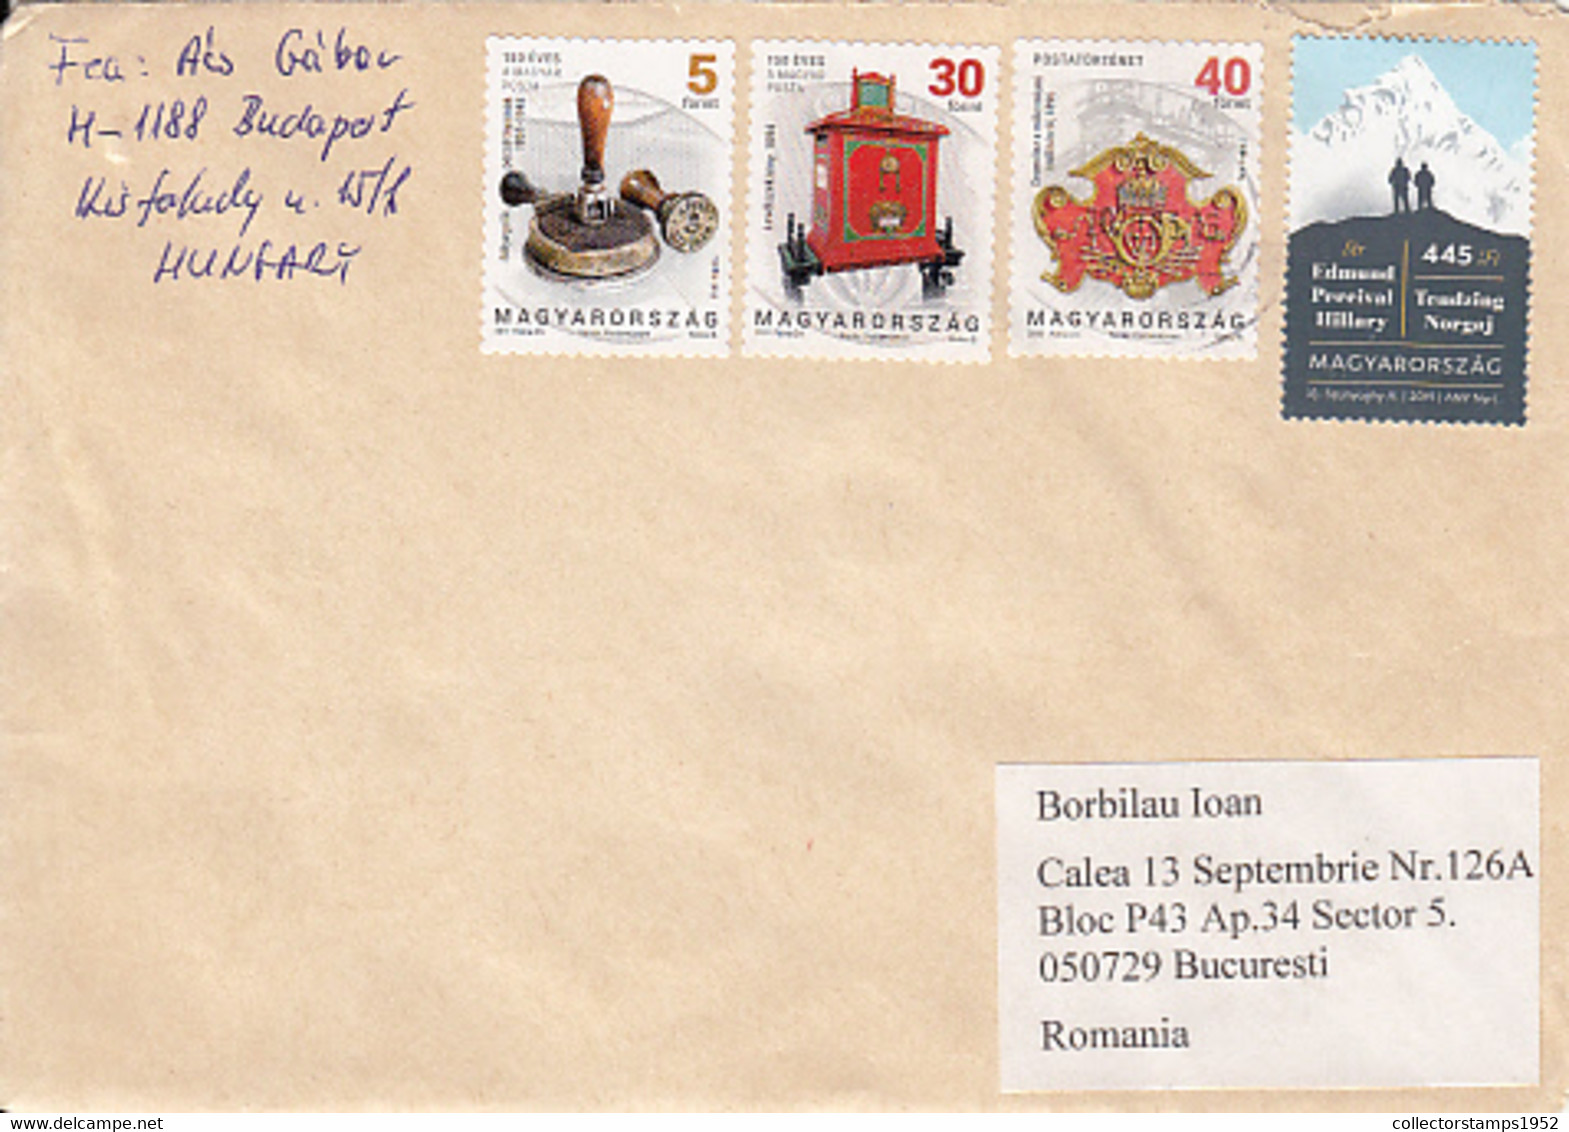 91934- INK STAMP, MAILBOXES, MOUNTAIN, FINE STAMPS ON COVER, 2020, HUNGARY - Covers & Documents